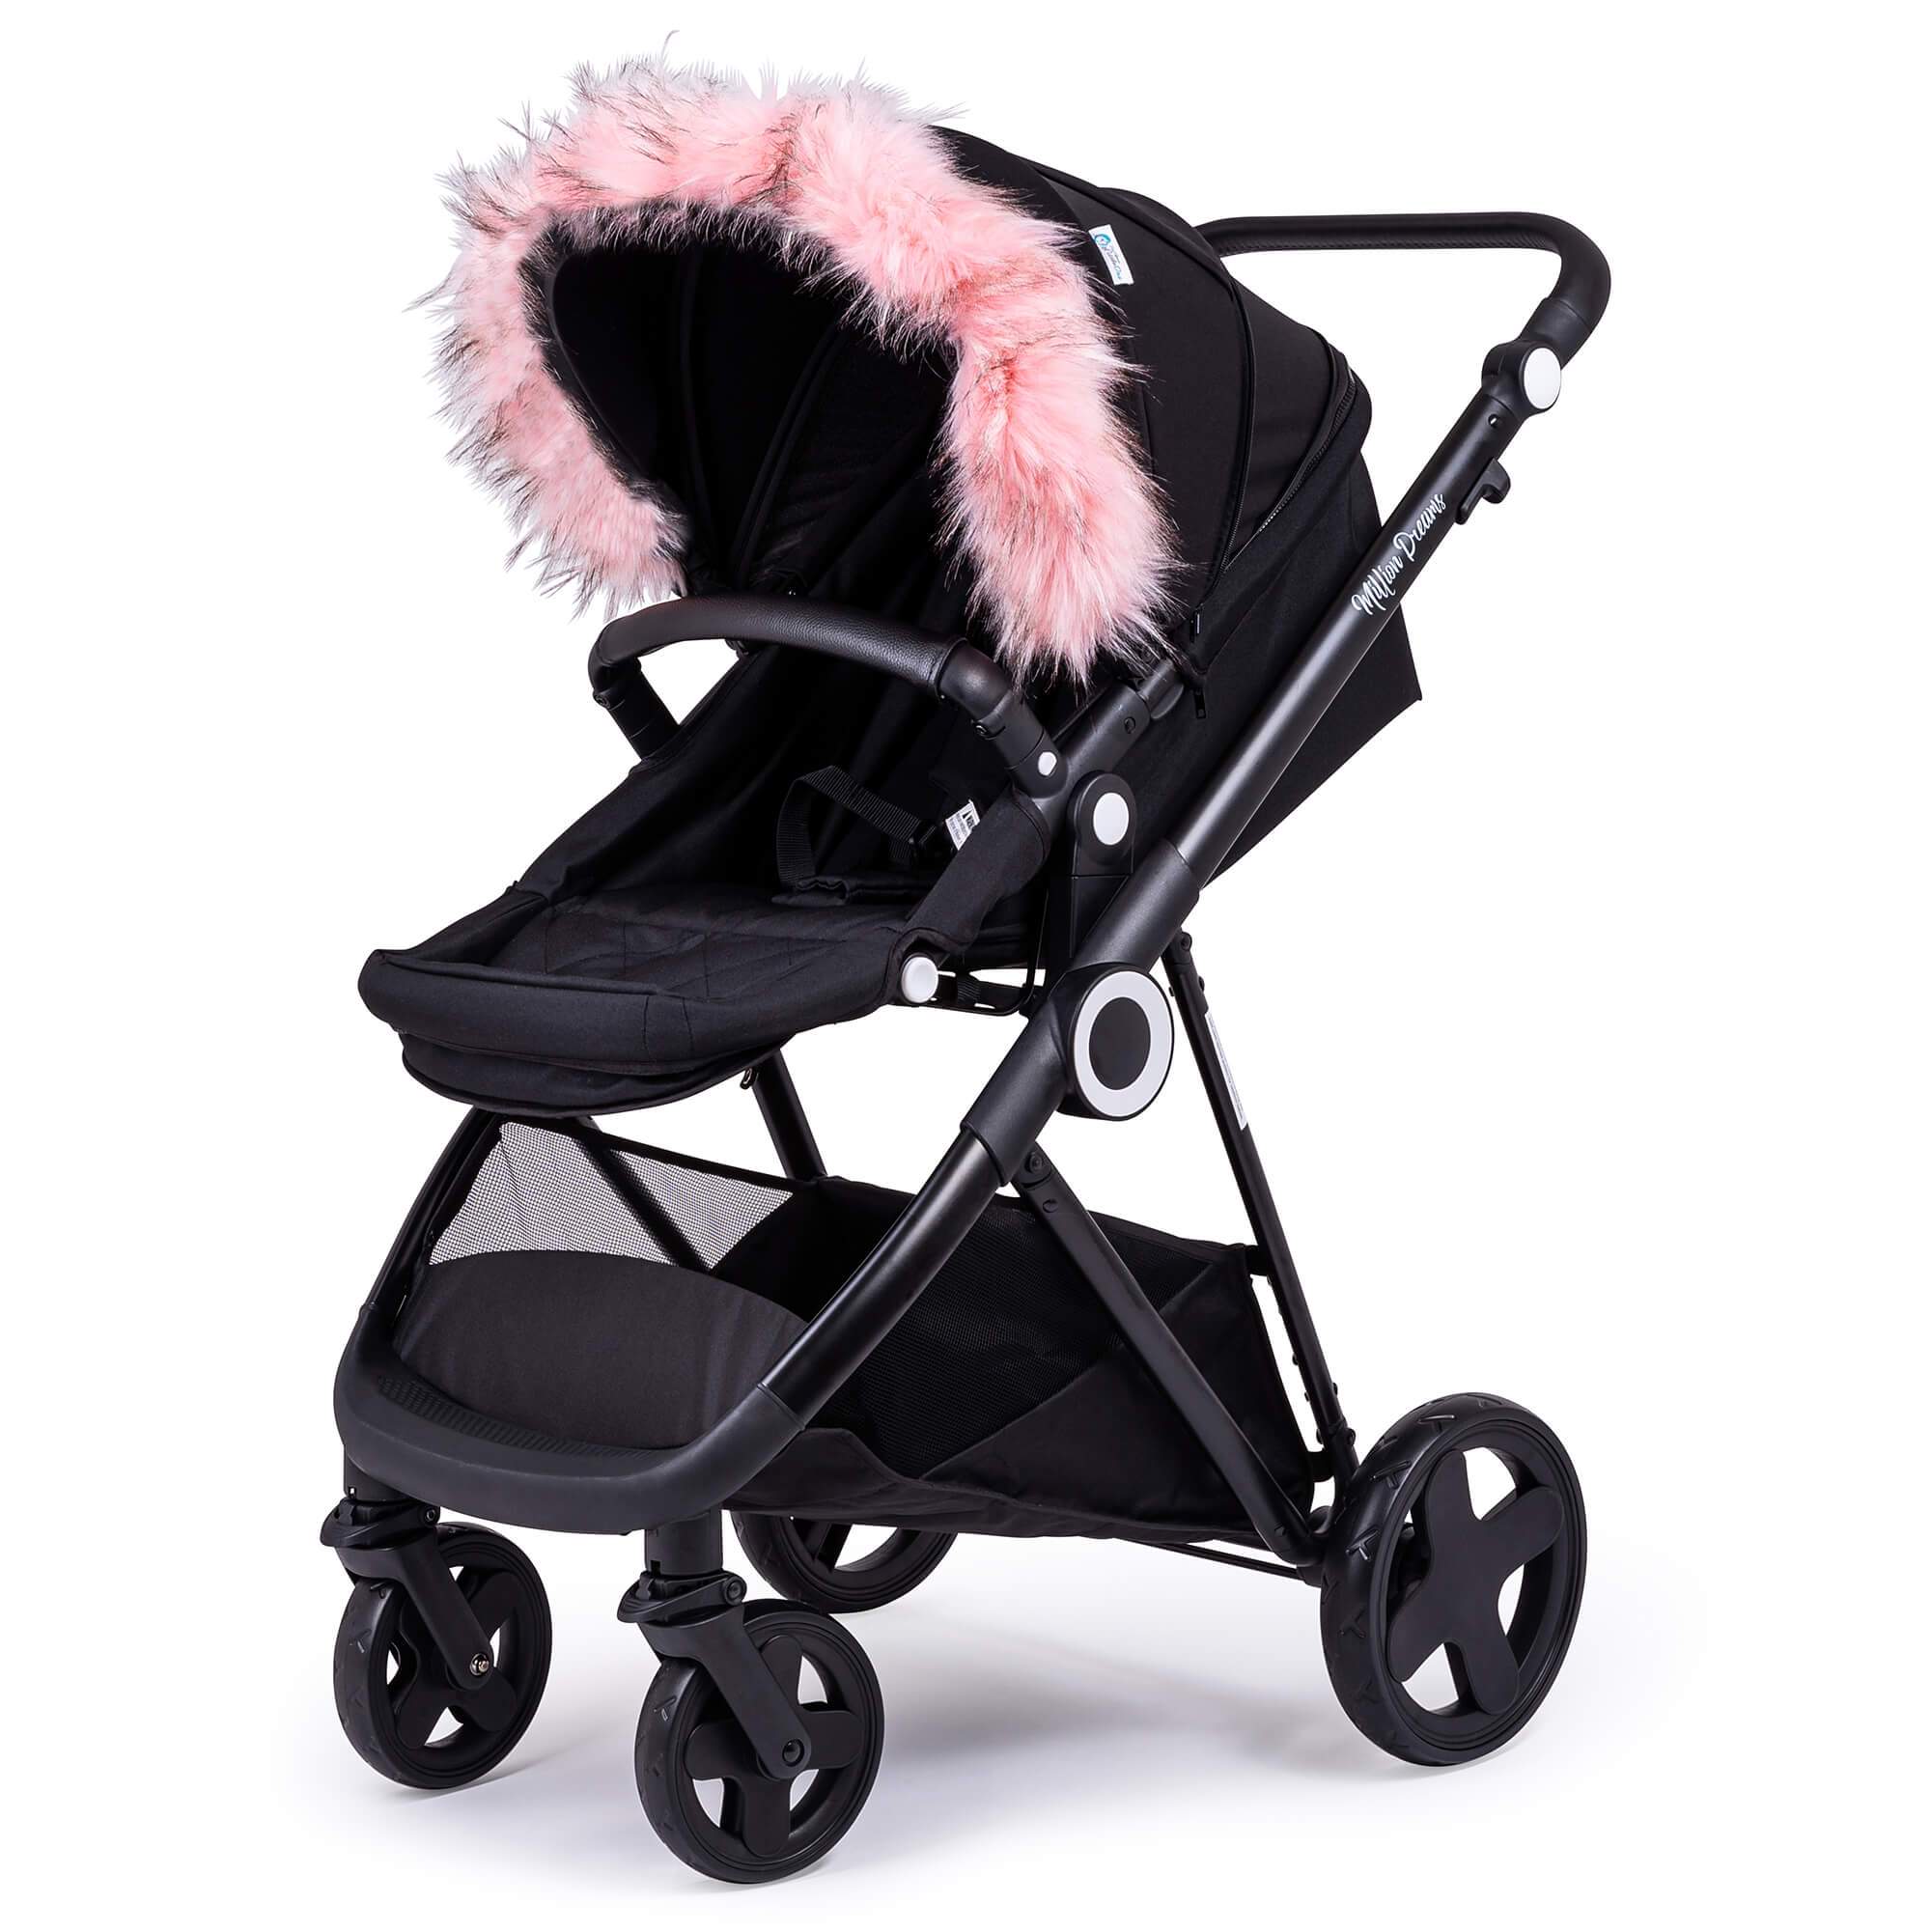 Pram Fur Hood Trim Attachment for Pushchair Compatible with Hauck - For Your Little One